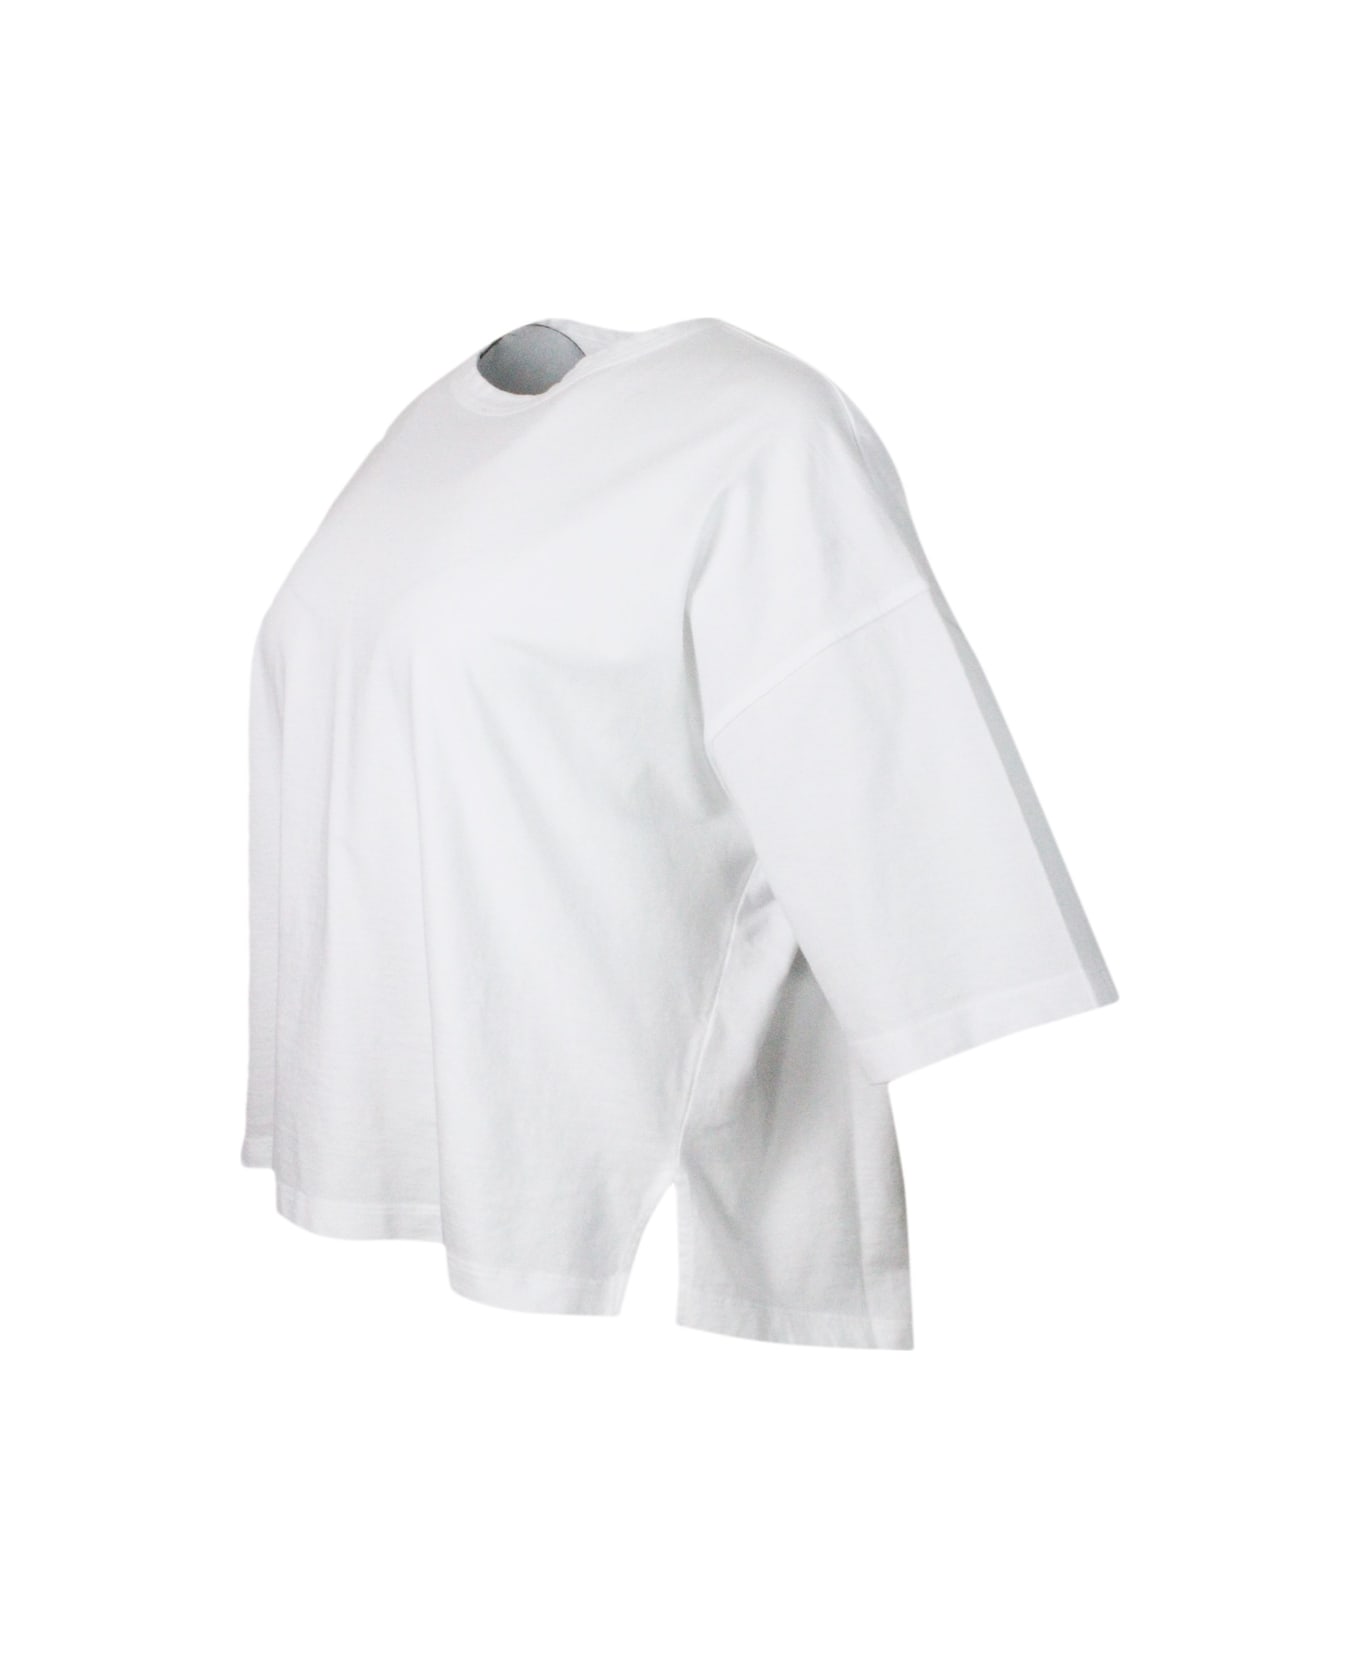 Malo Crew-neck, Short-sleeved T-shirt In 100% Soft Cotton, With An Oversized Fit And Vents On The Sides - White Tシャツ